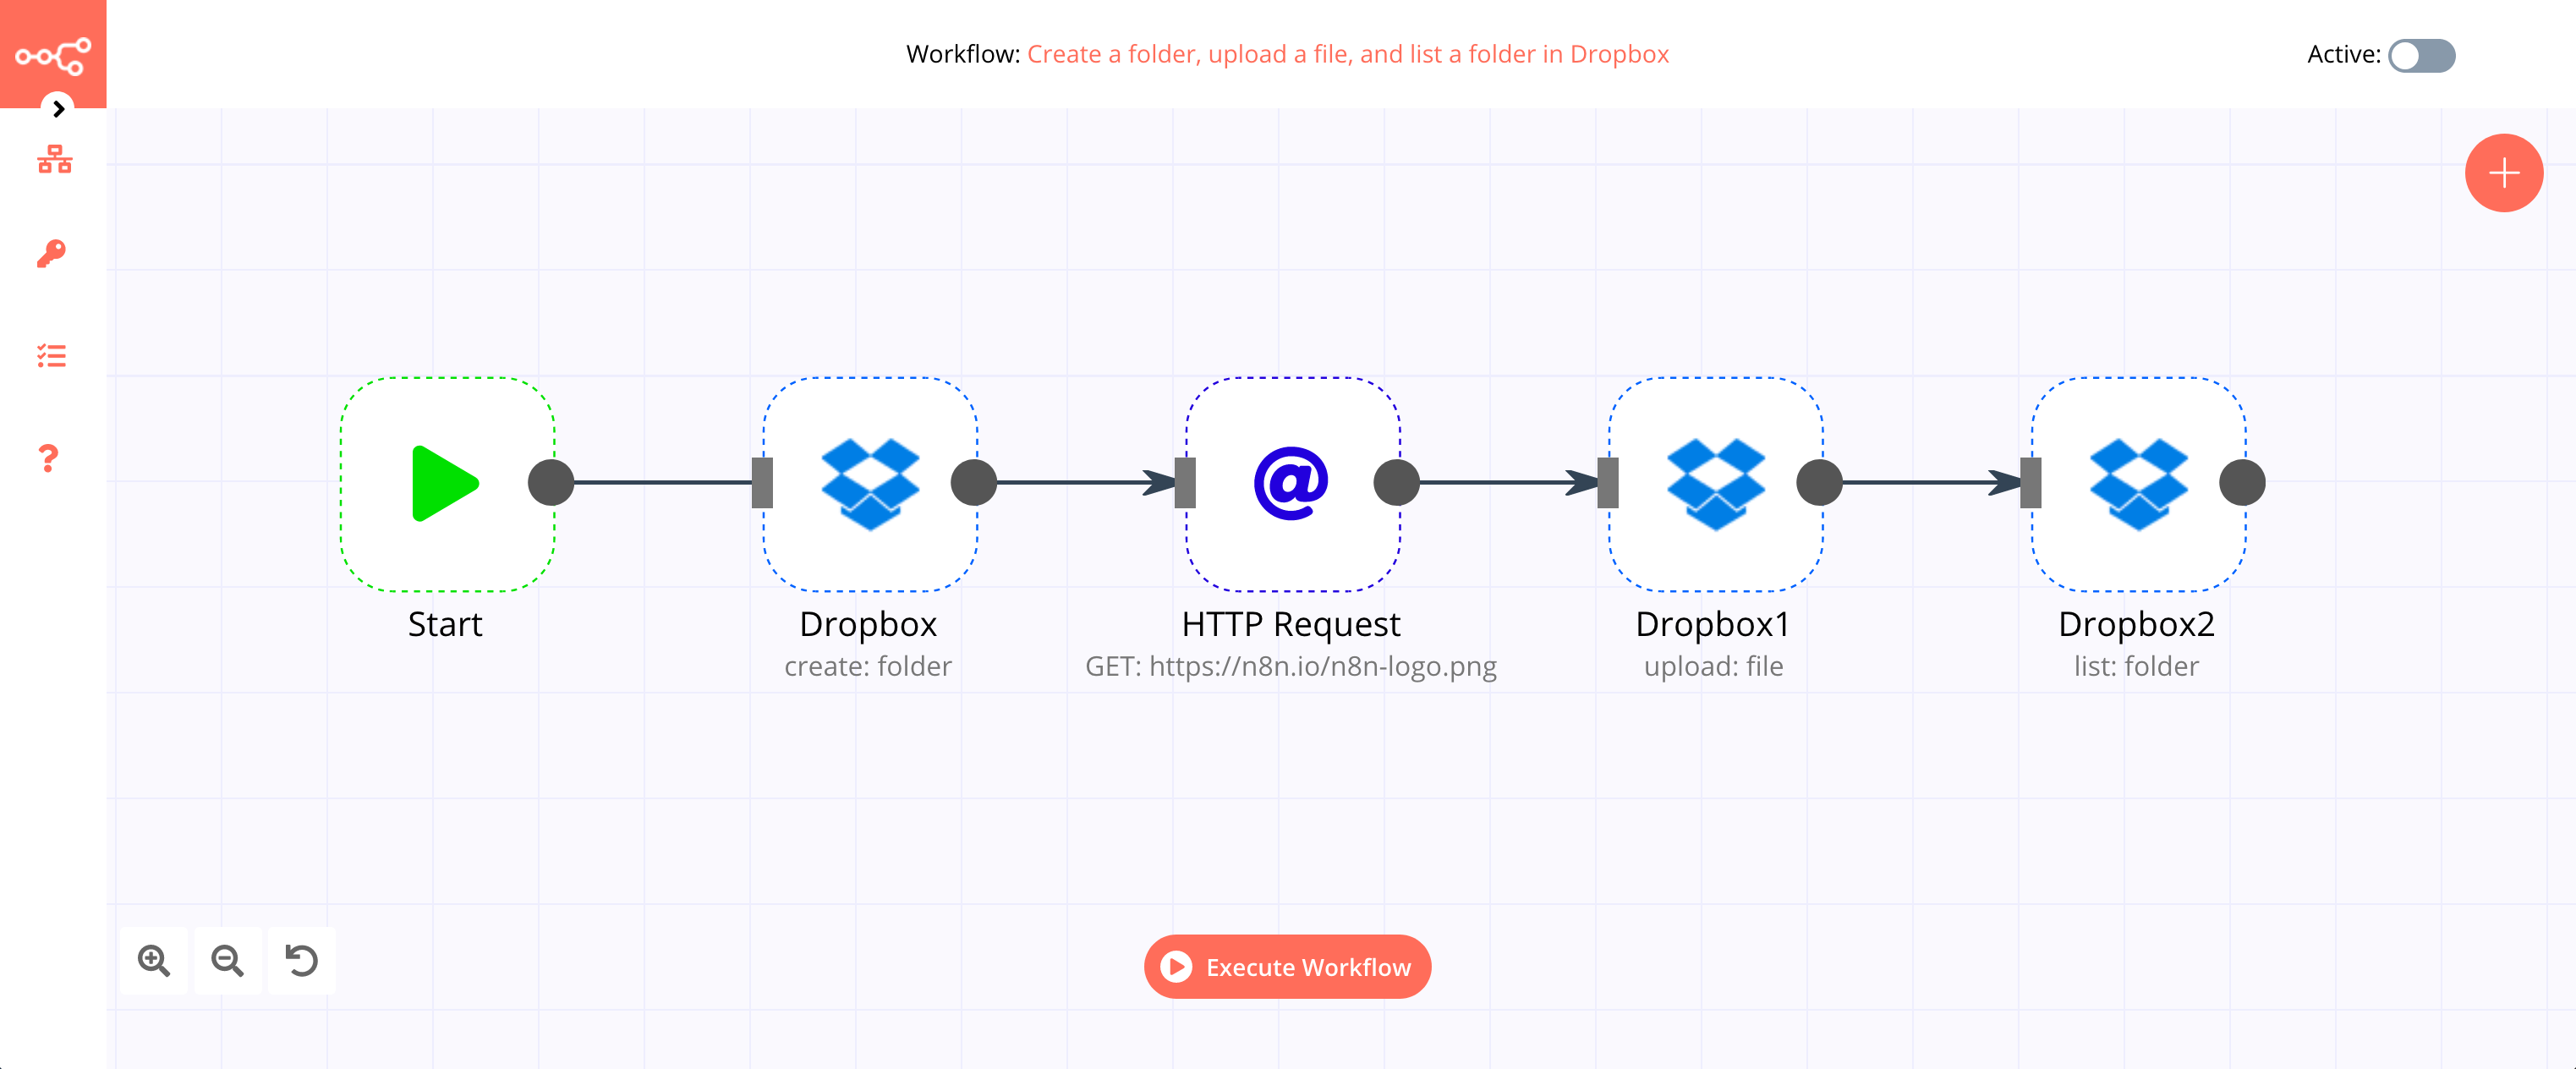 A workflow with the Dropbox node